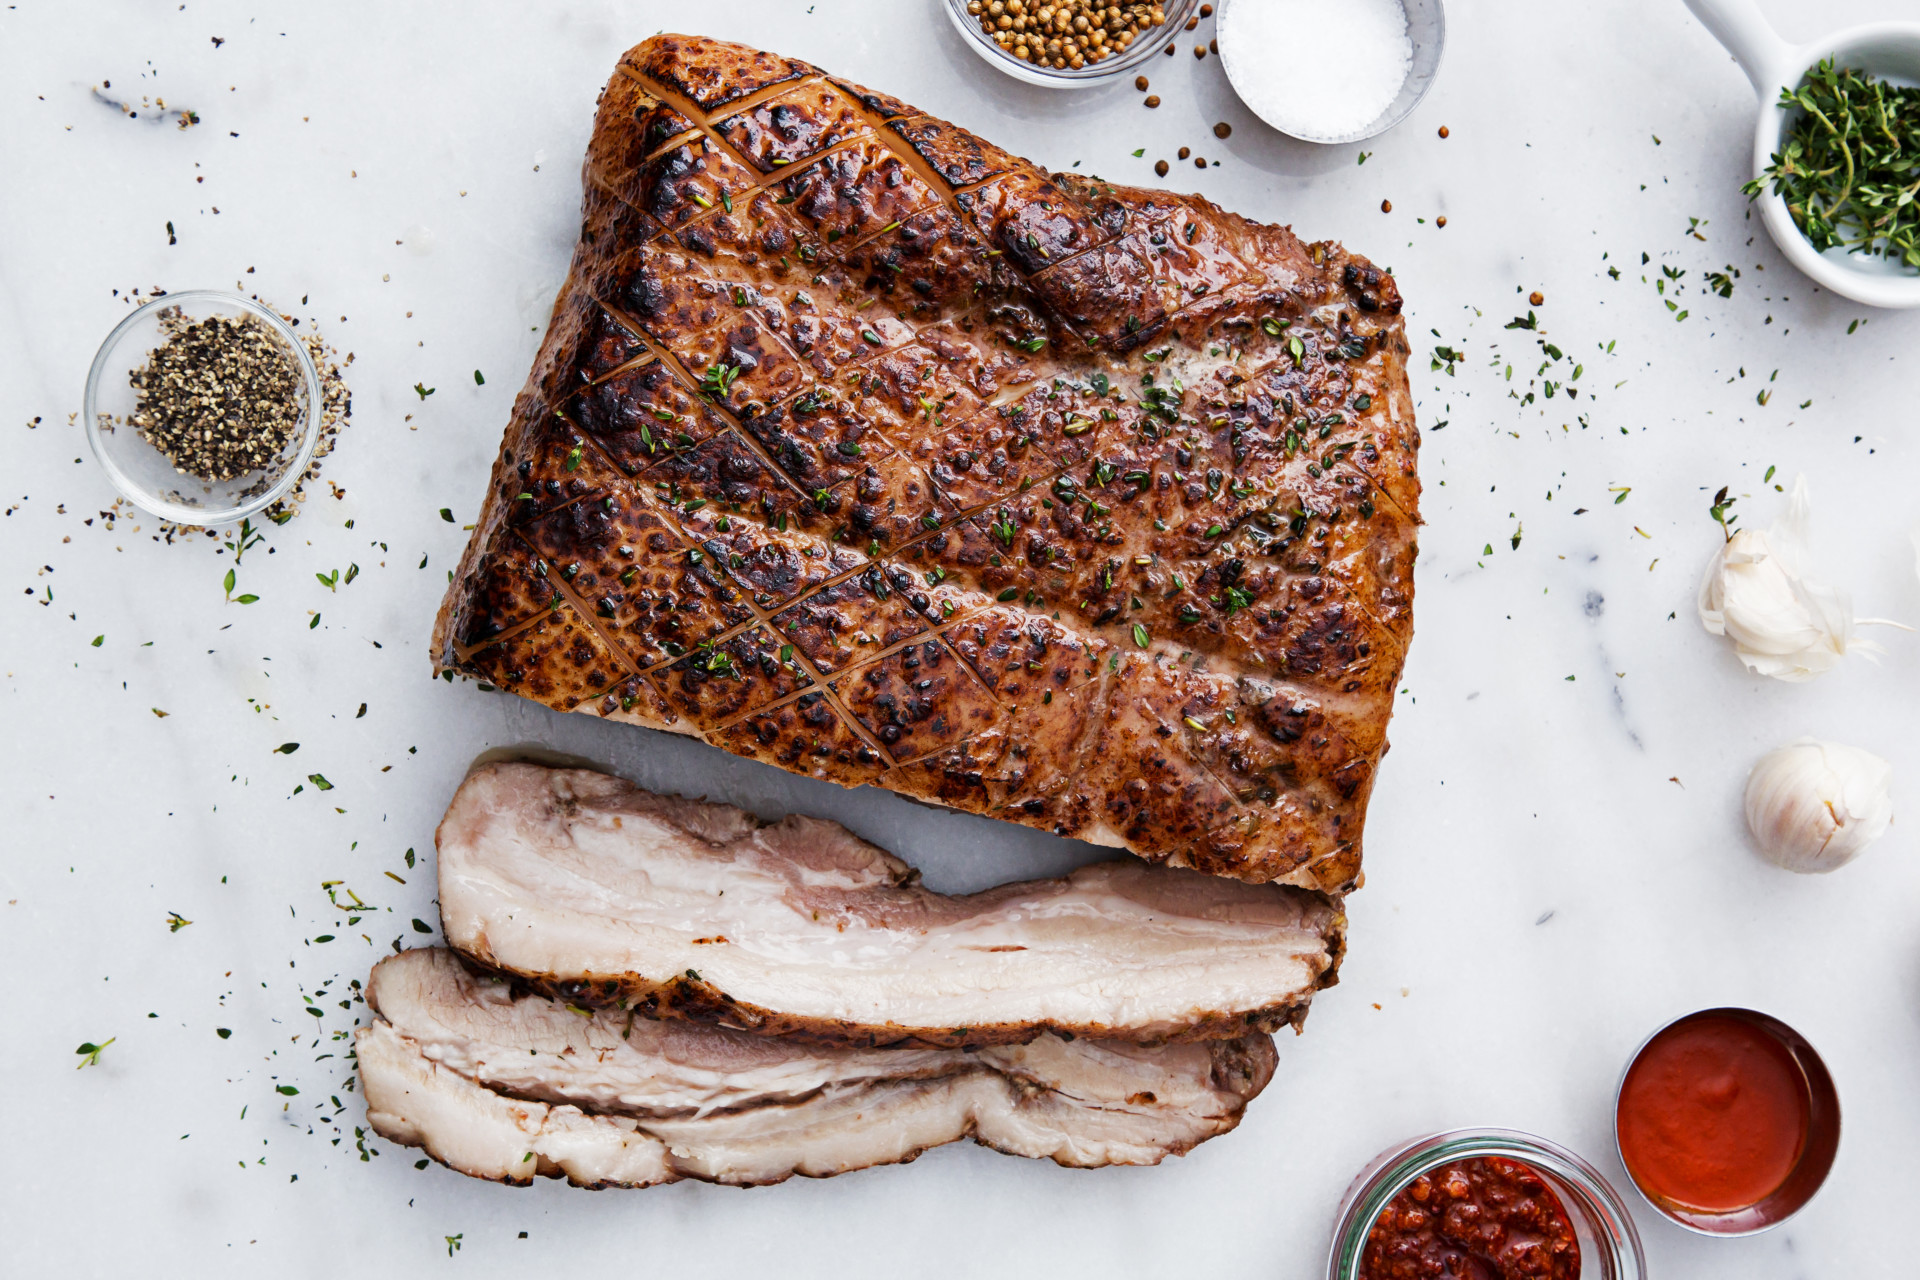 Thinly cut pork belly on table with sauces and spices